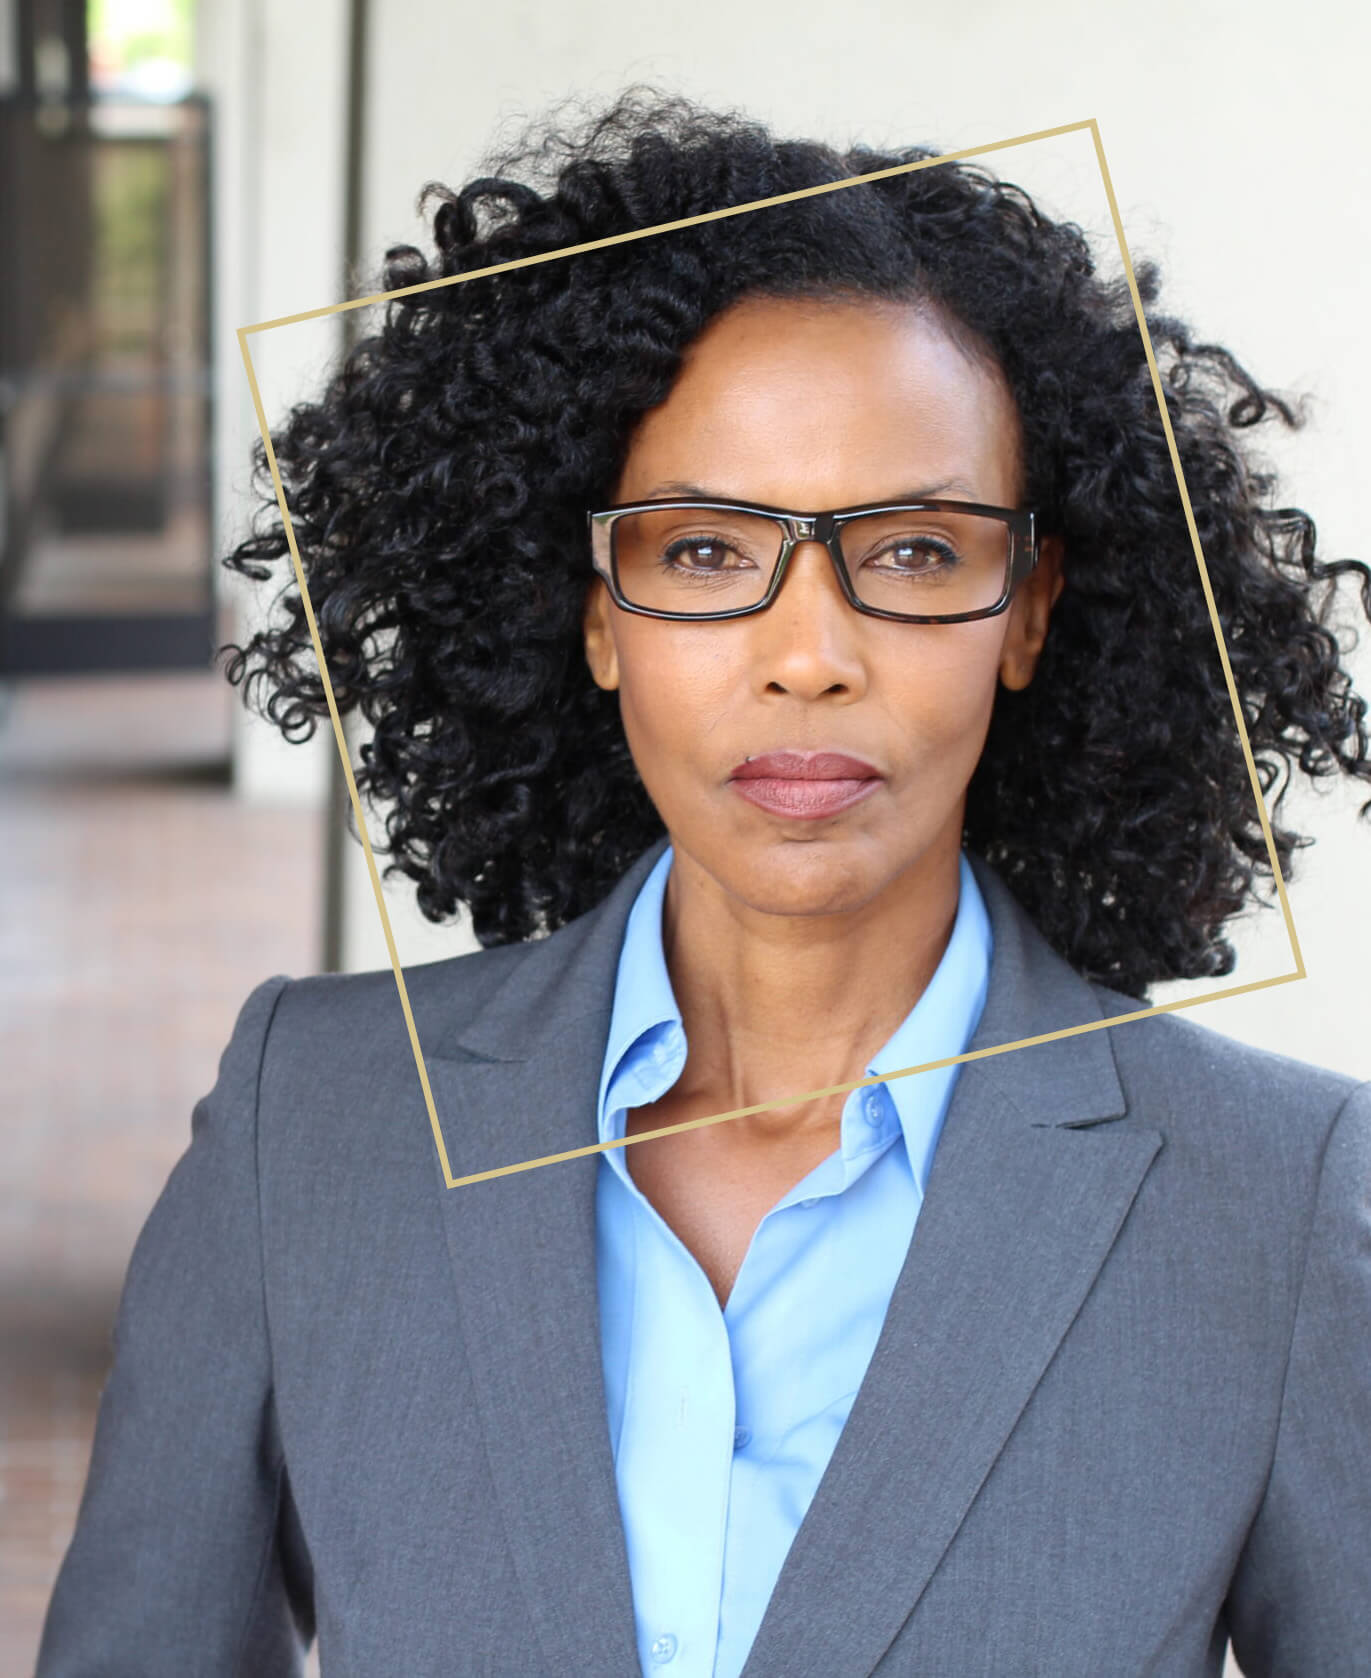 Black business woman with glasses in a gray suit